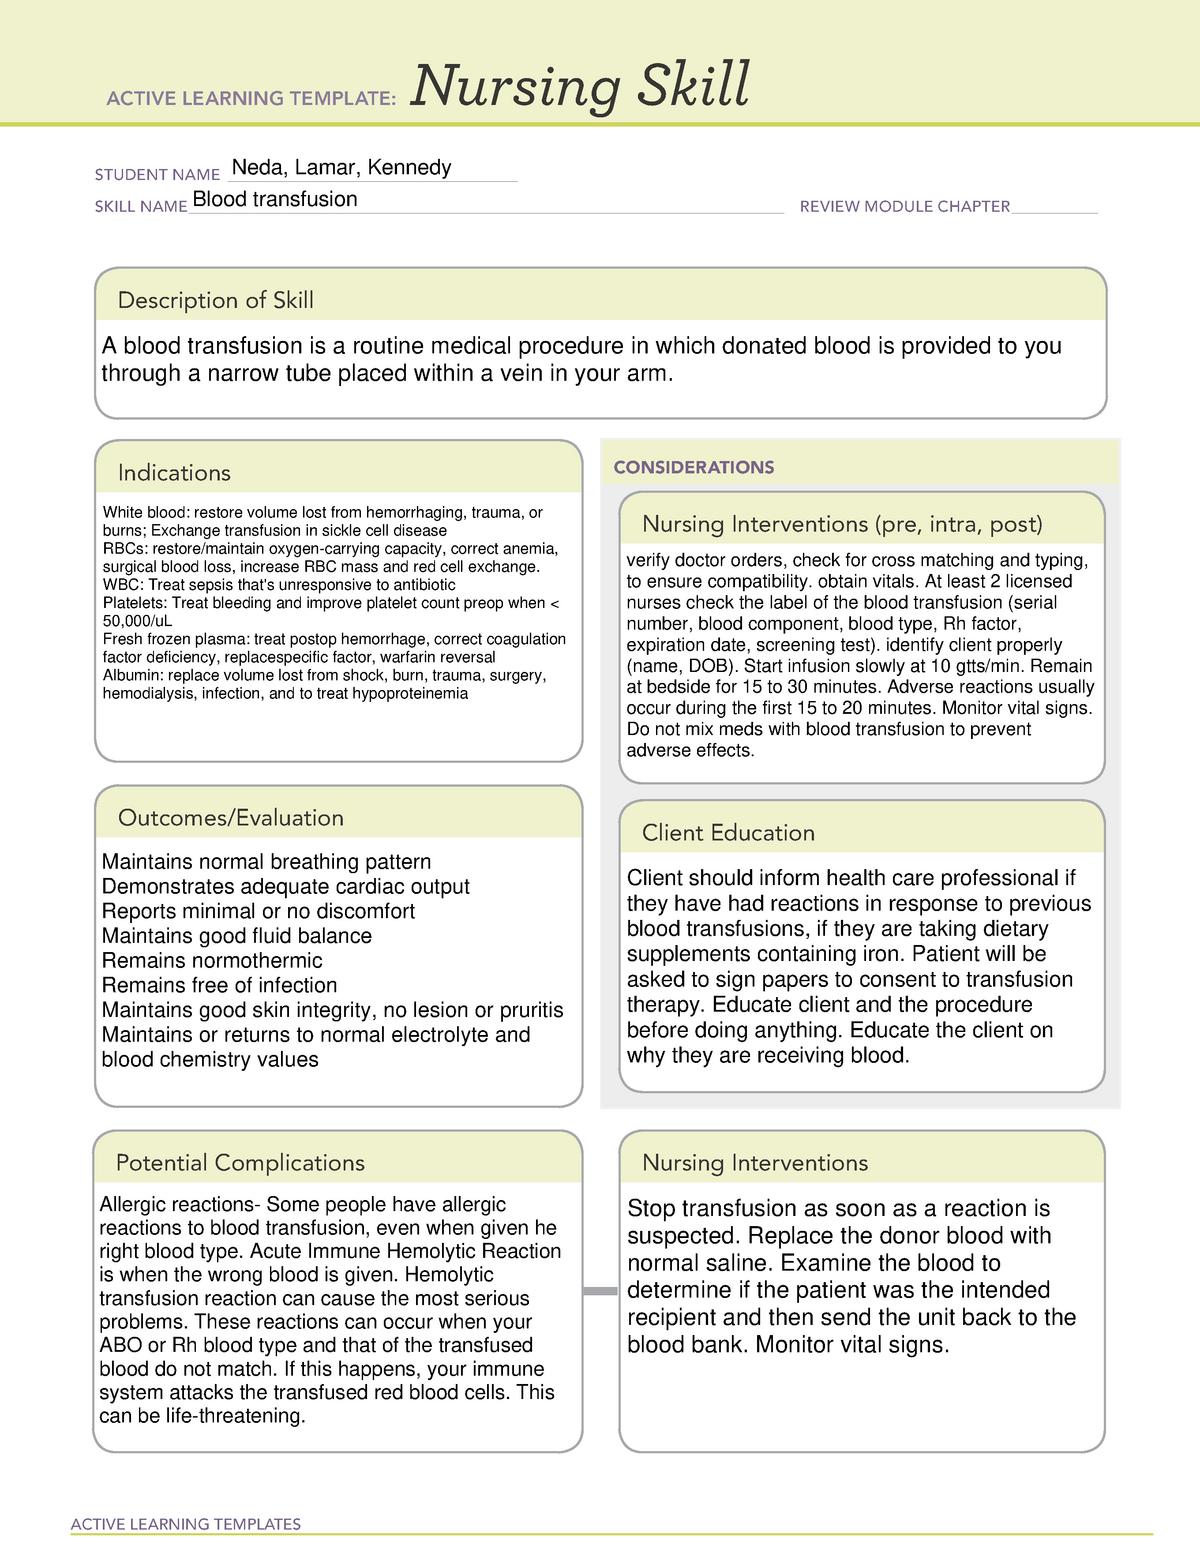 Blood administration ACTIVE LEARNING TEMPLATES Nursing Skill STUDENT